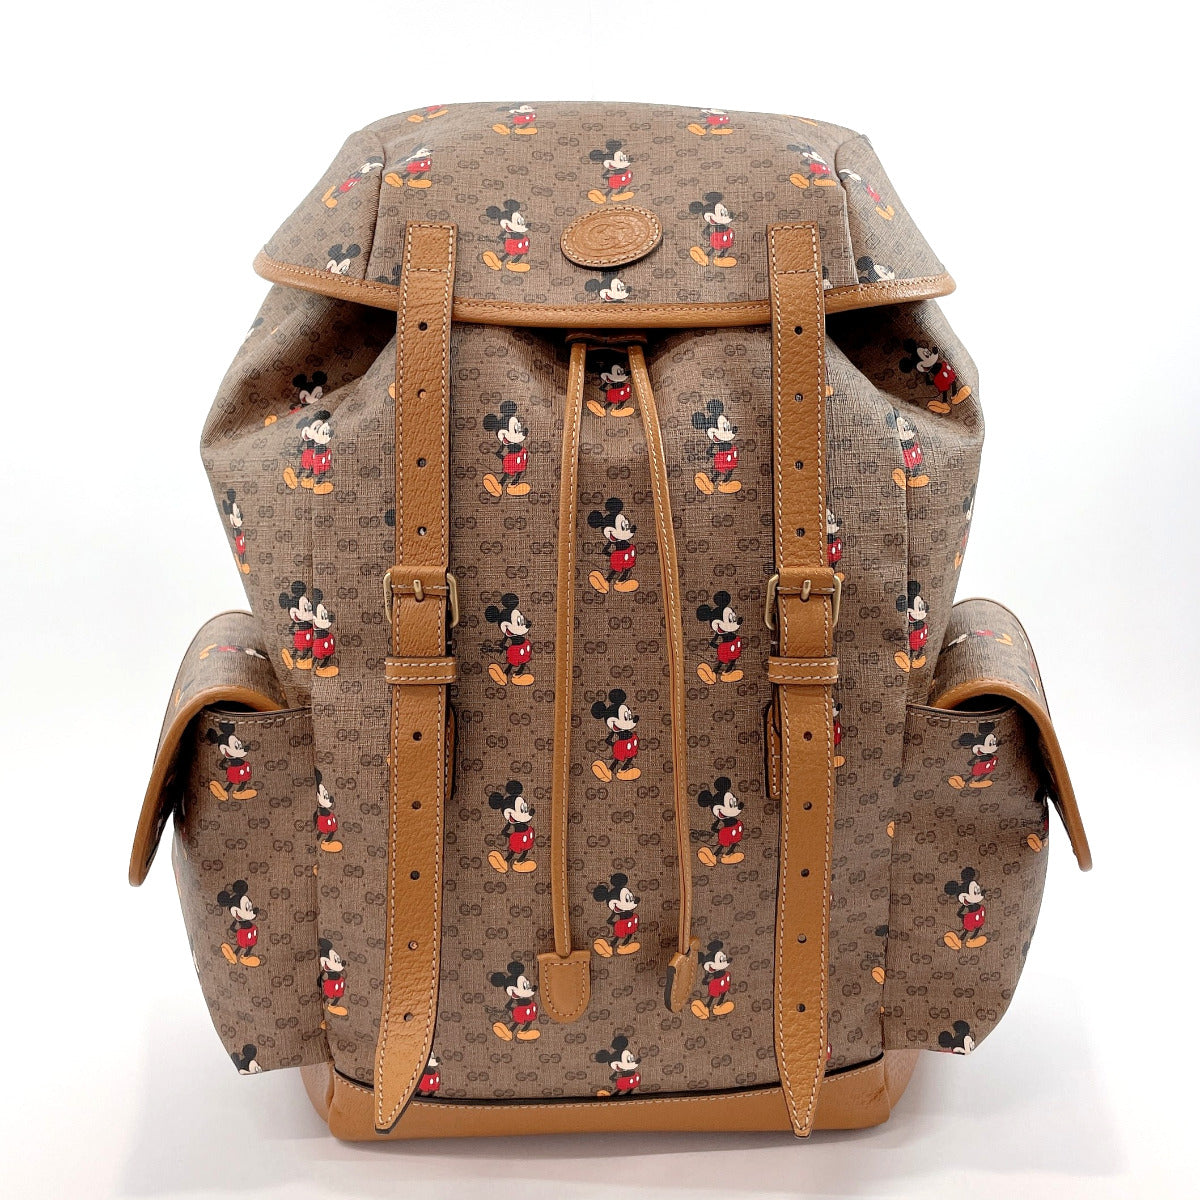 GUCCI Backpack Daypack 603898 Mickey backpack GG Supreme Canvas Brown  unisex Used